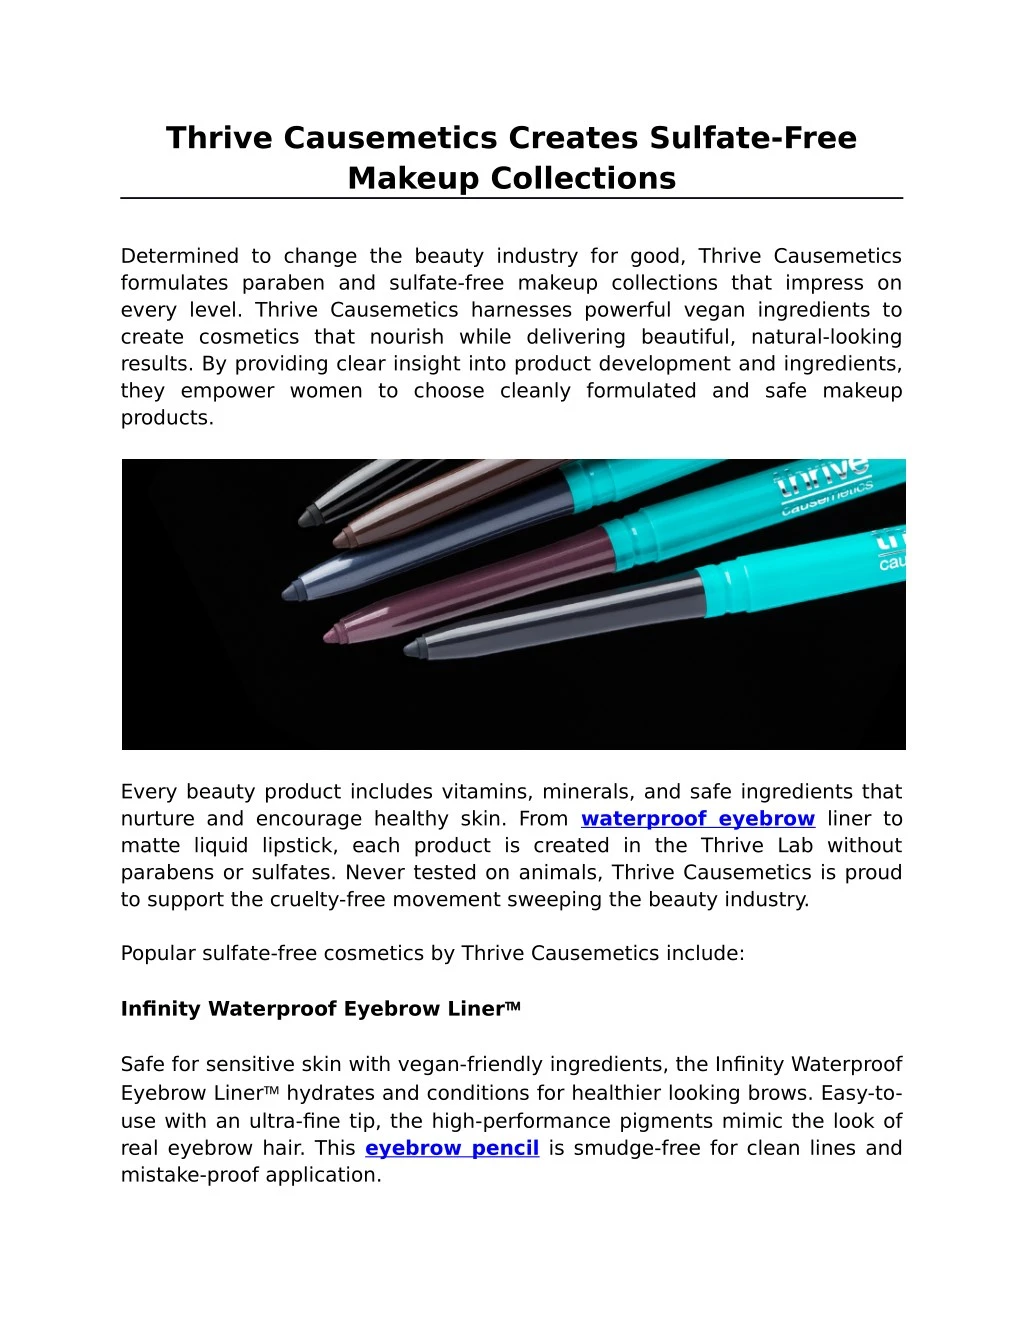 PPT - Thrive Causemetics Creates Sulfate-Free Makeup Collections ...